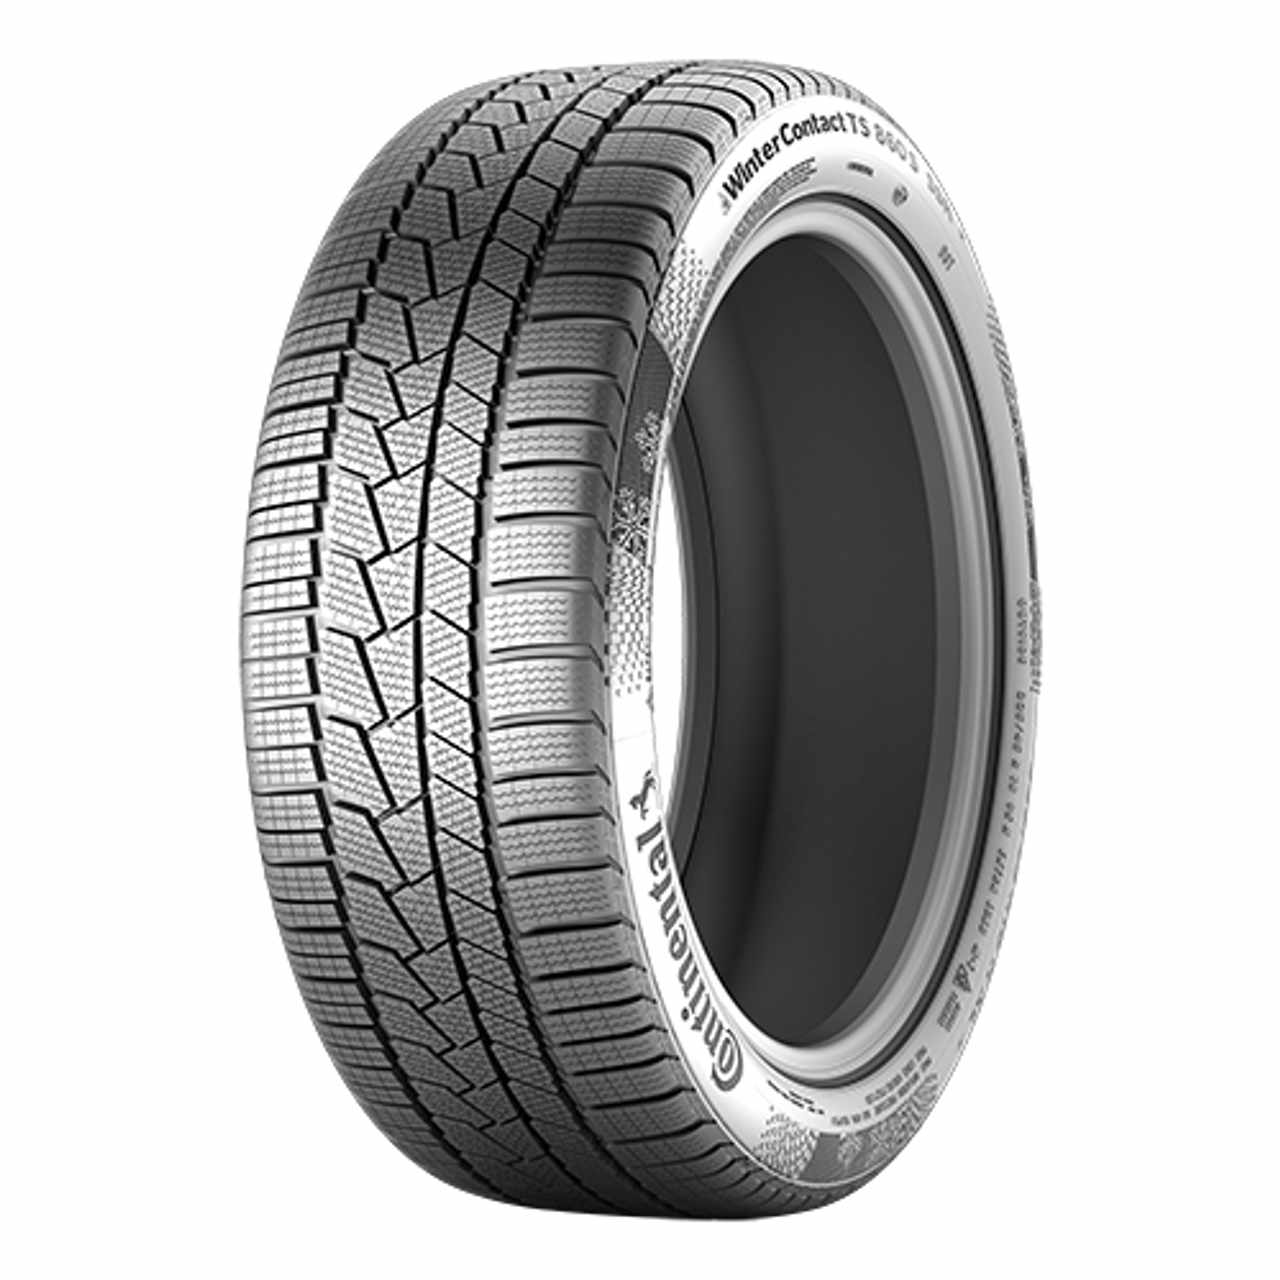 CONTINENTAL WINTERCONTACT TS 860 S (*) (EVc) SSR 225/45R18 95H BSW XL